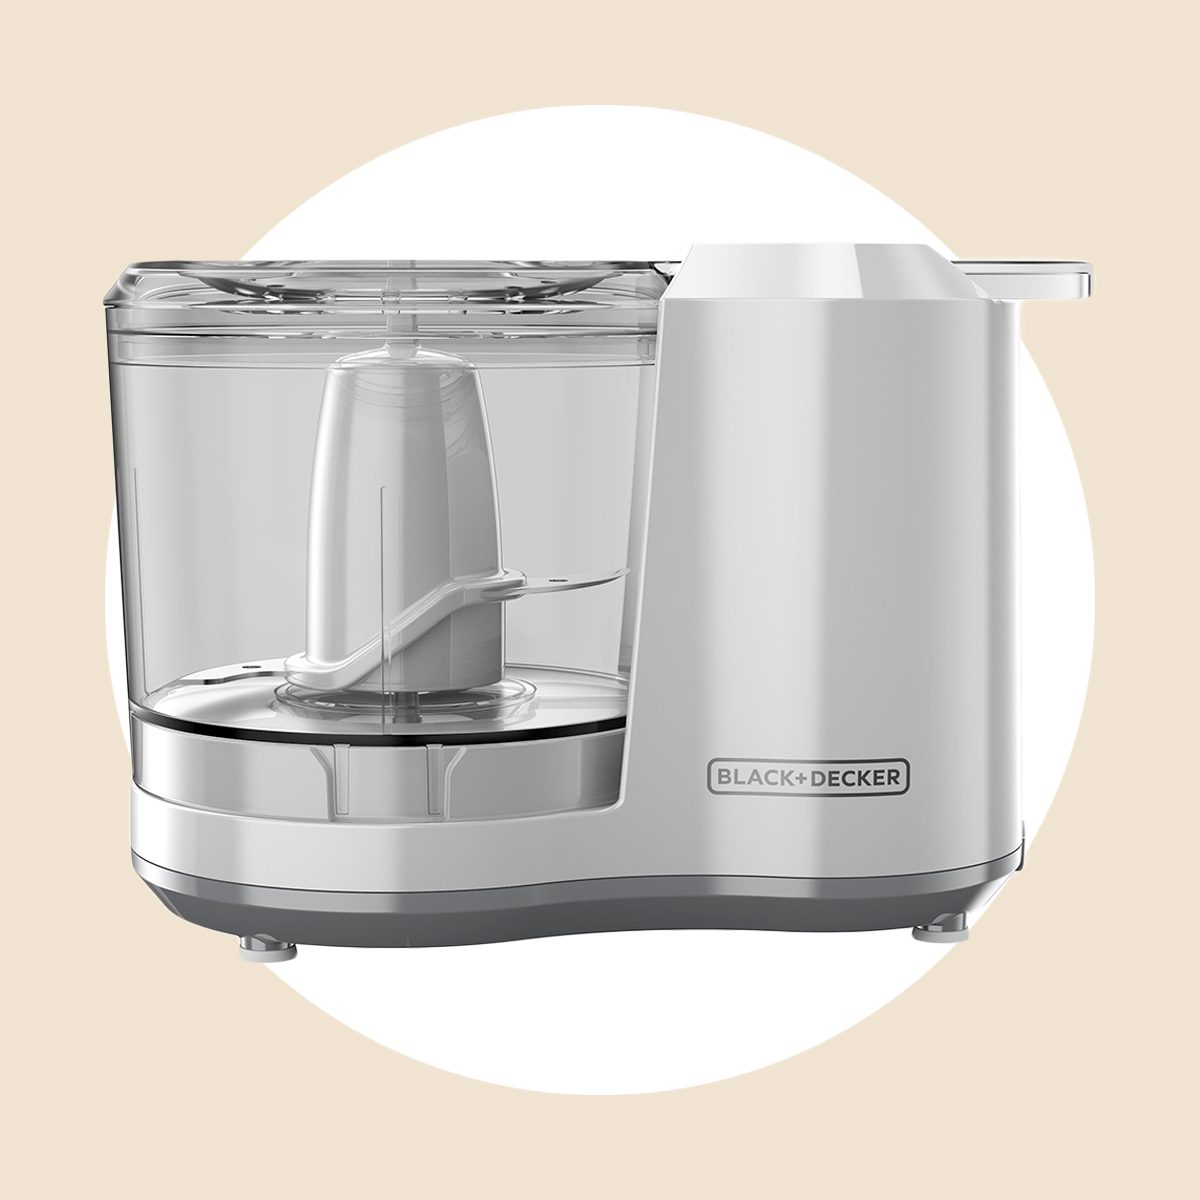 The Best Mini Food Processor - A Detailed Review - Home Sweet